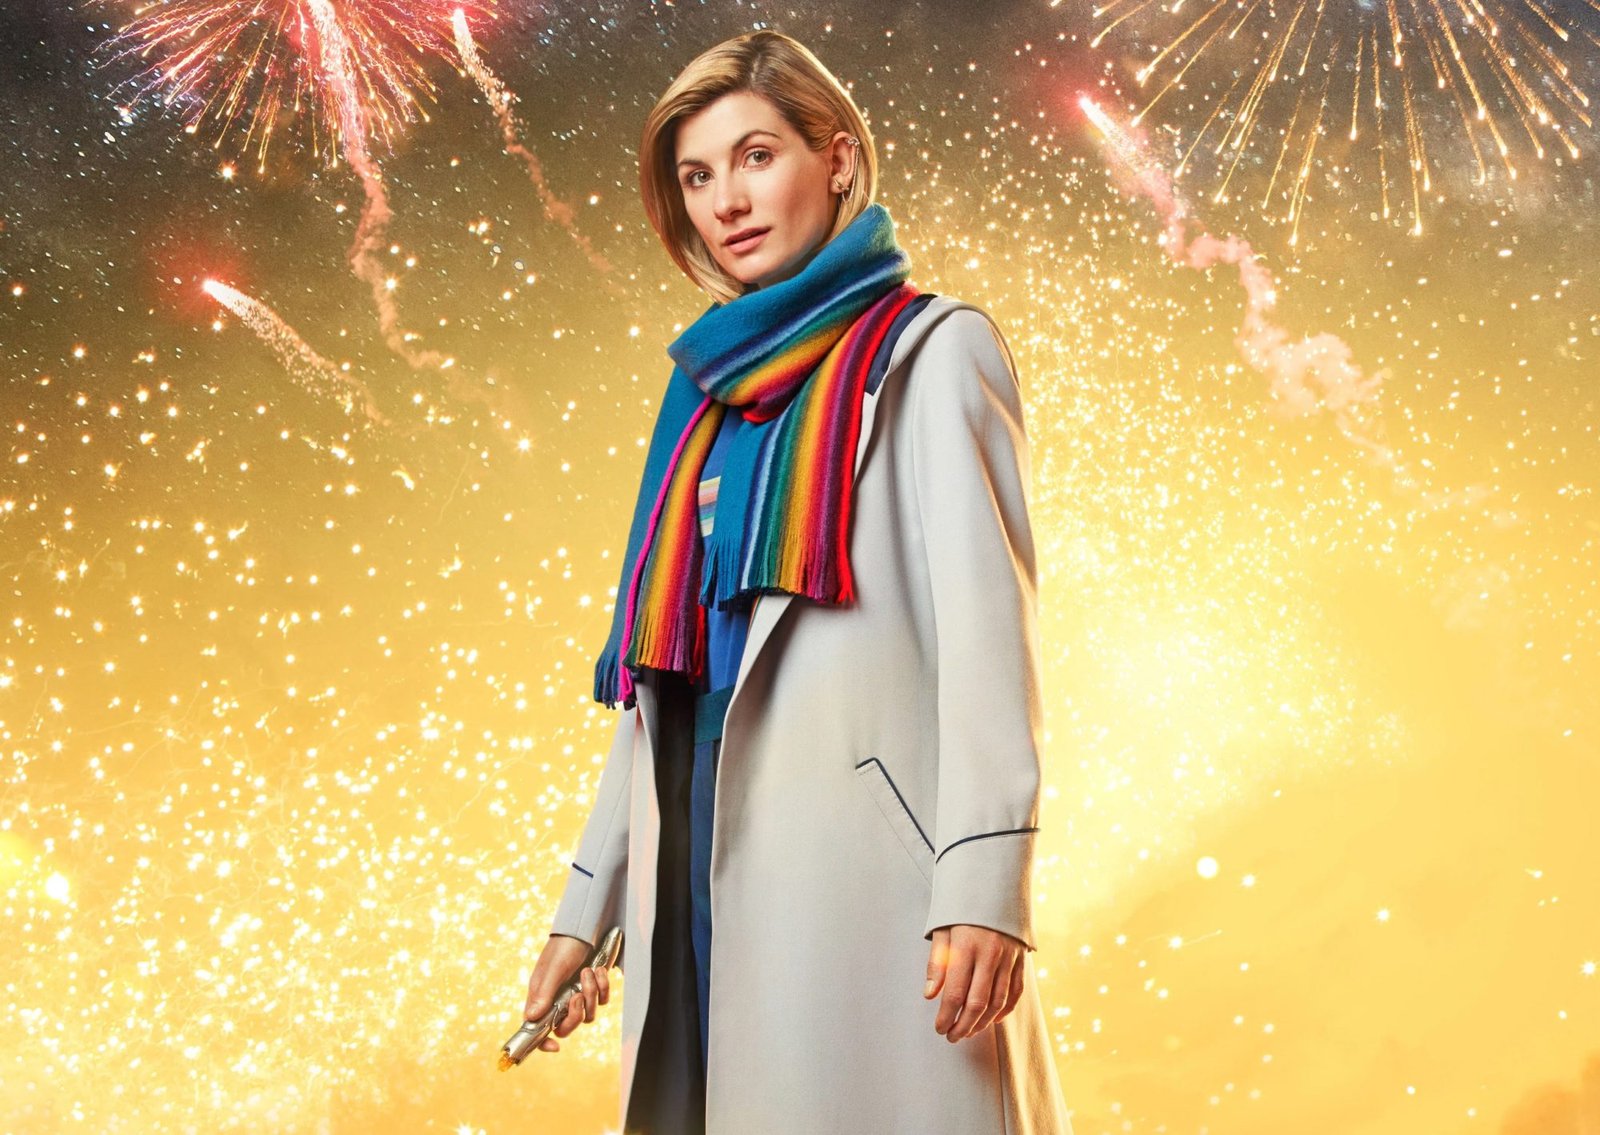 Synopsis and Guest Cast Revealed for Doctor Who New Year’s 2022 Special